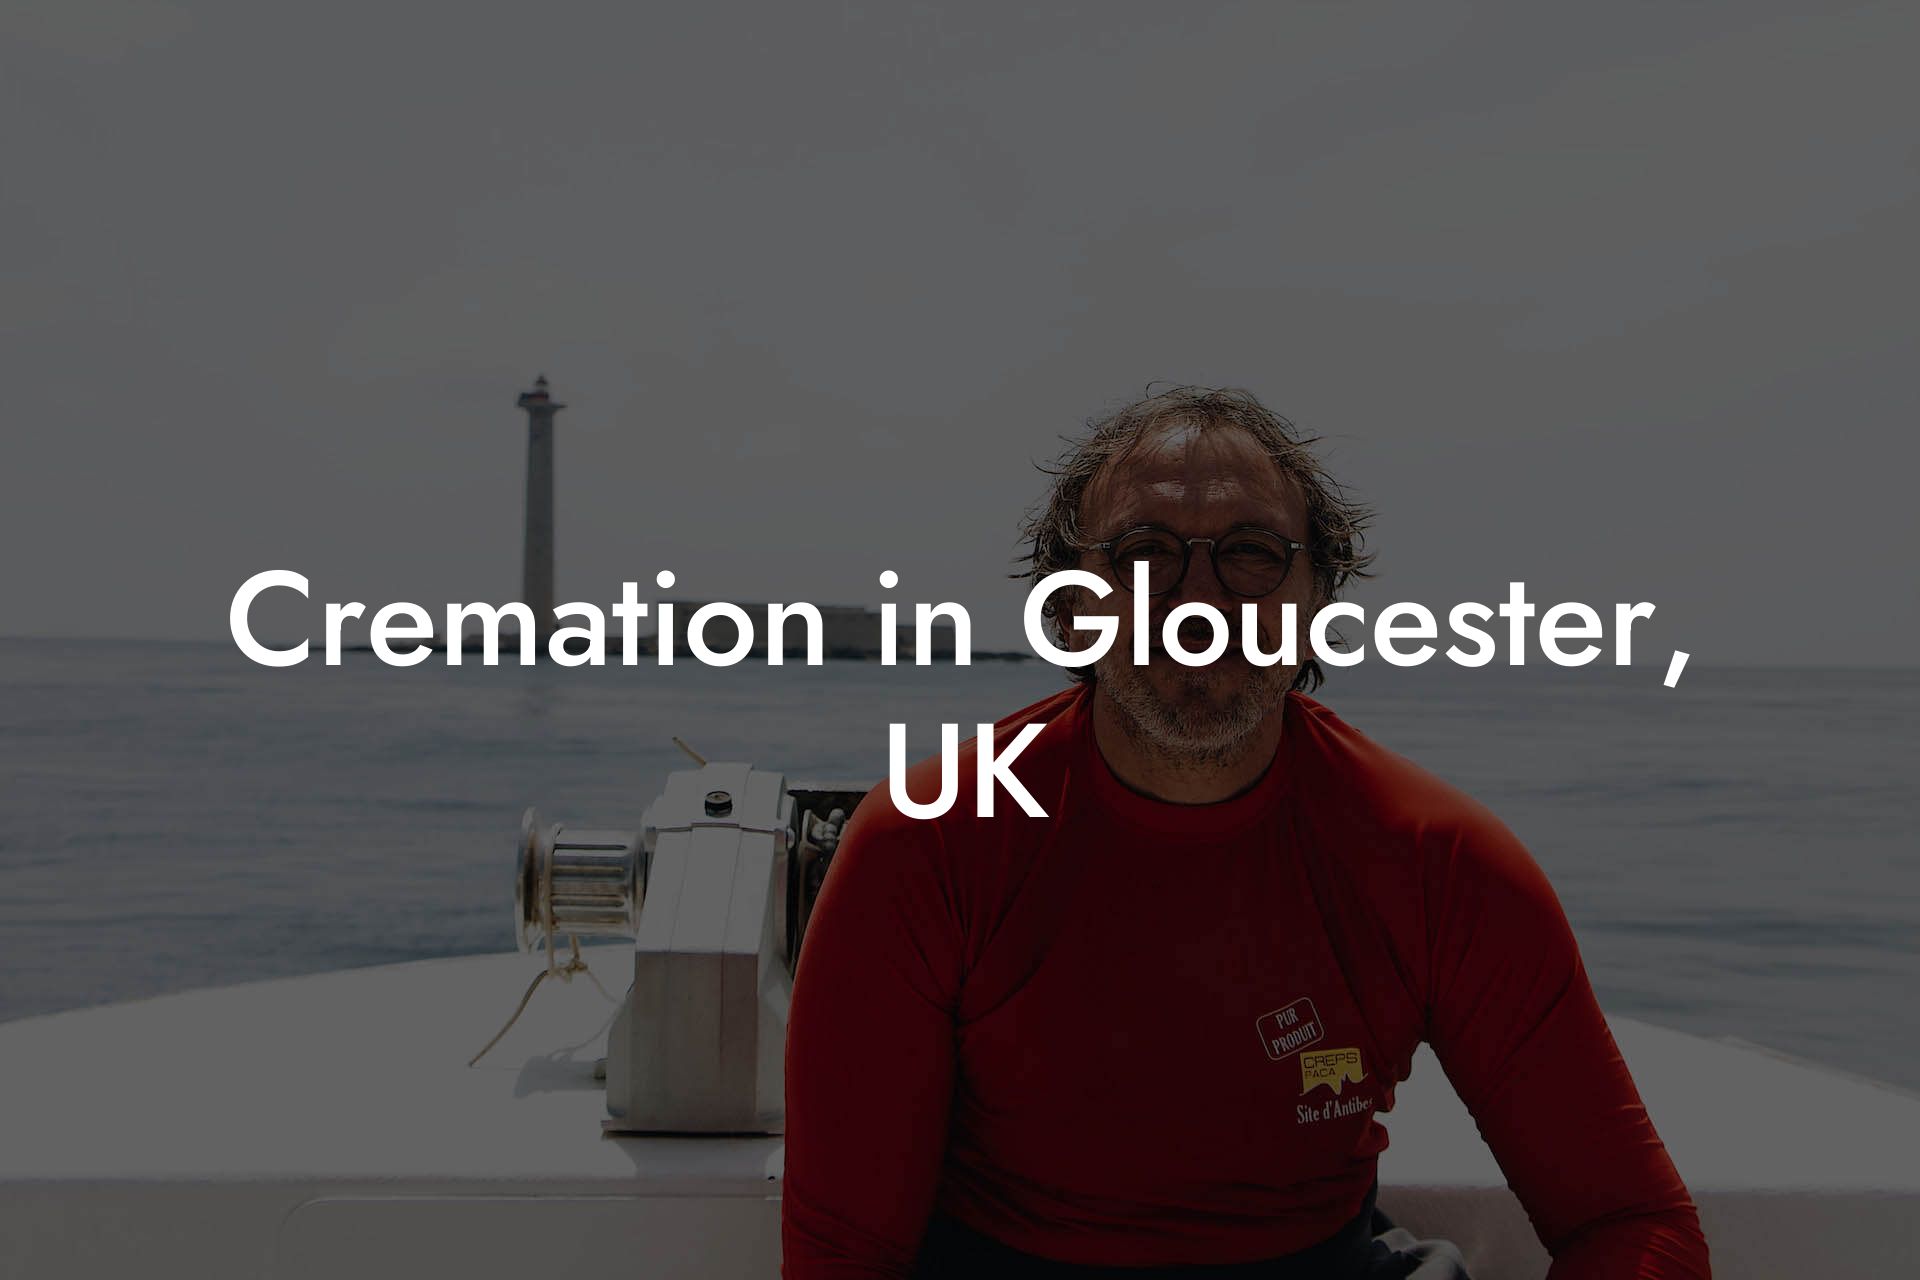 Cremation in Gloucester, UK